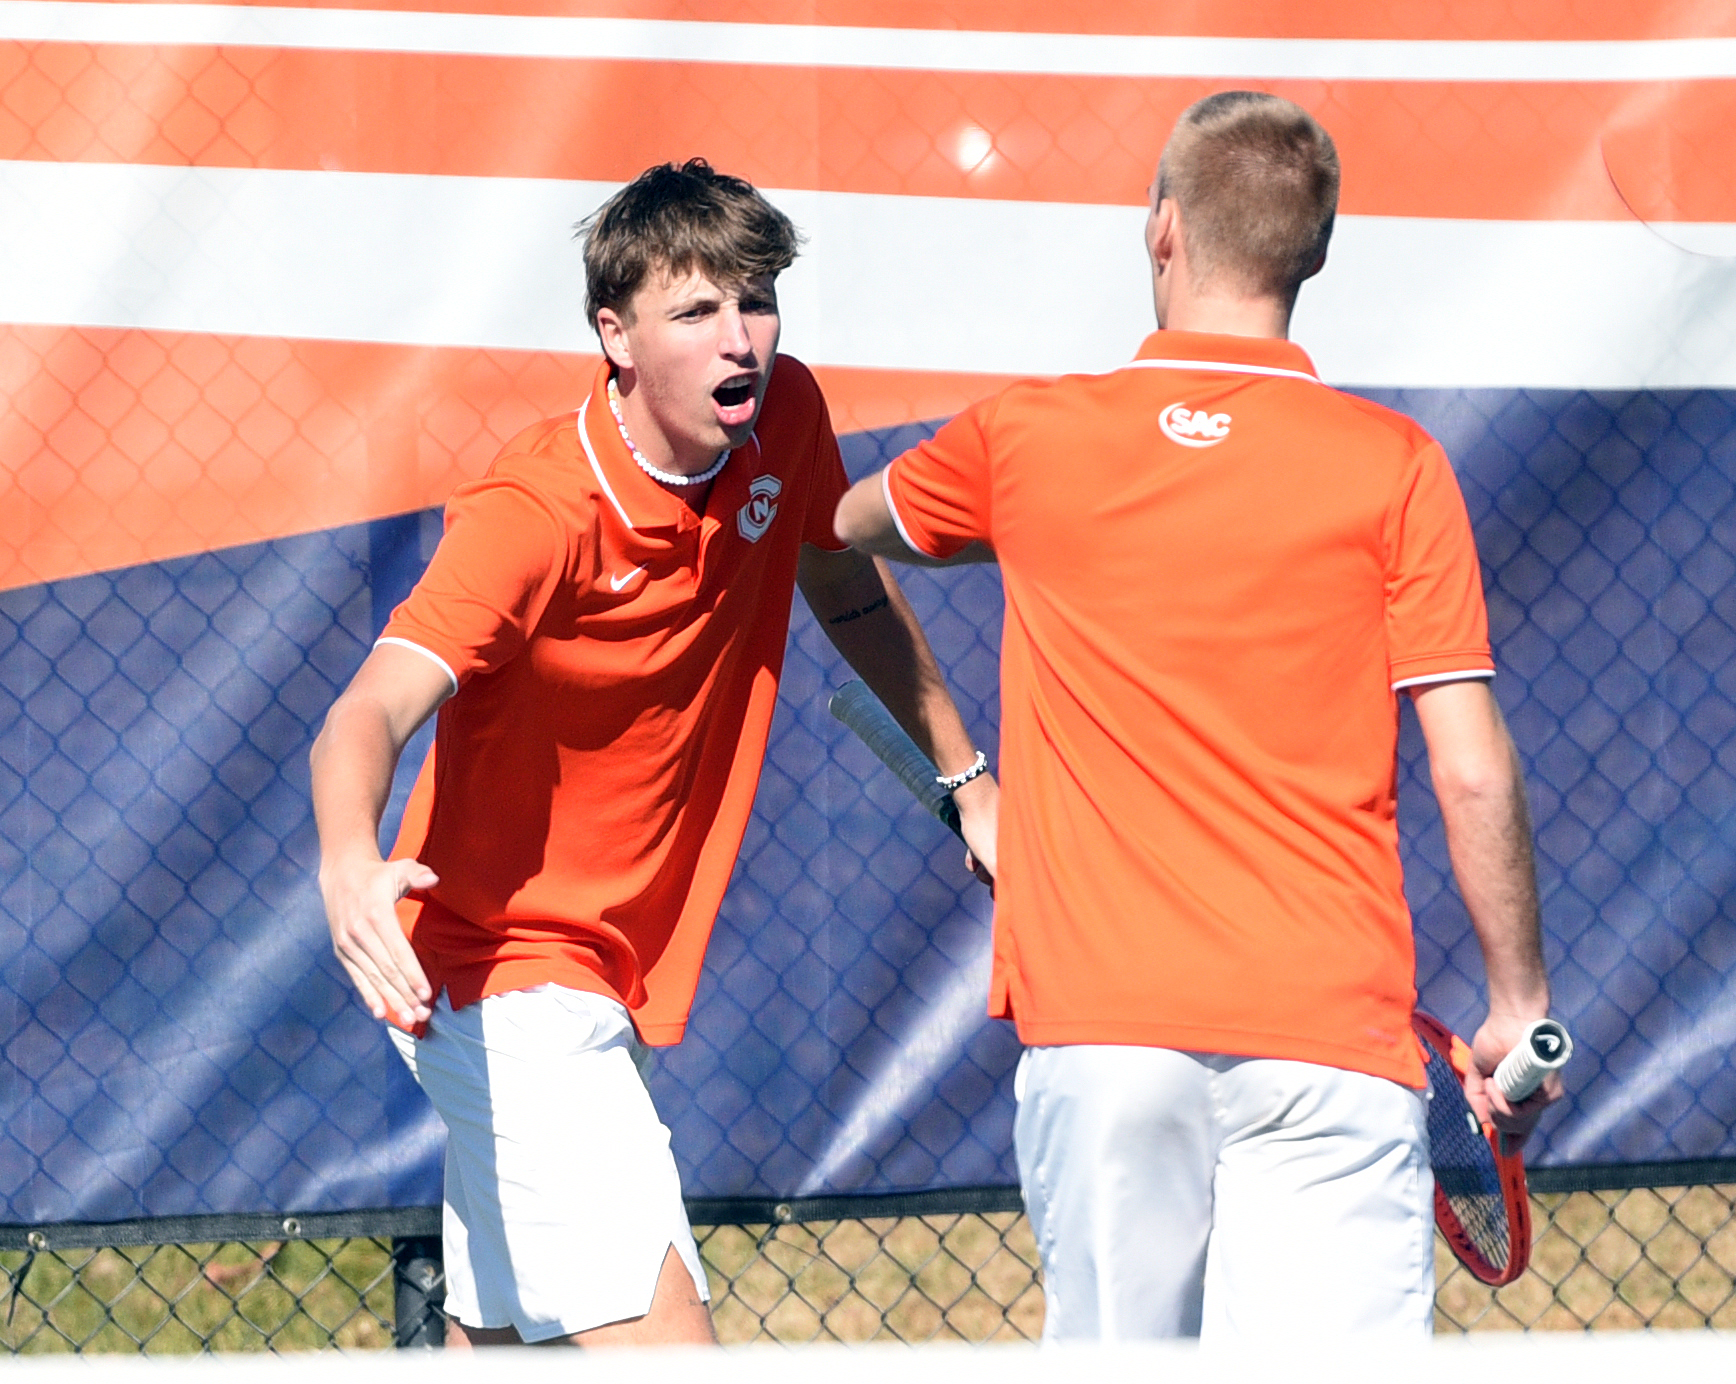 Eagles Take Eight of Nine Matches, Defeat Union, 6-1